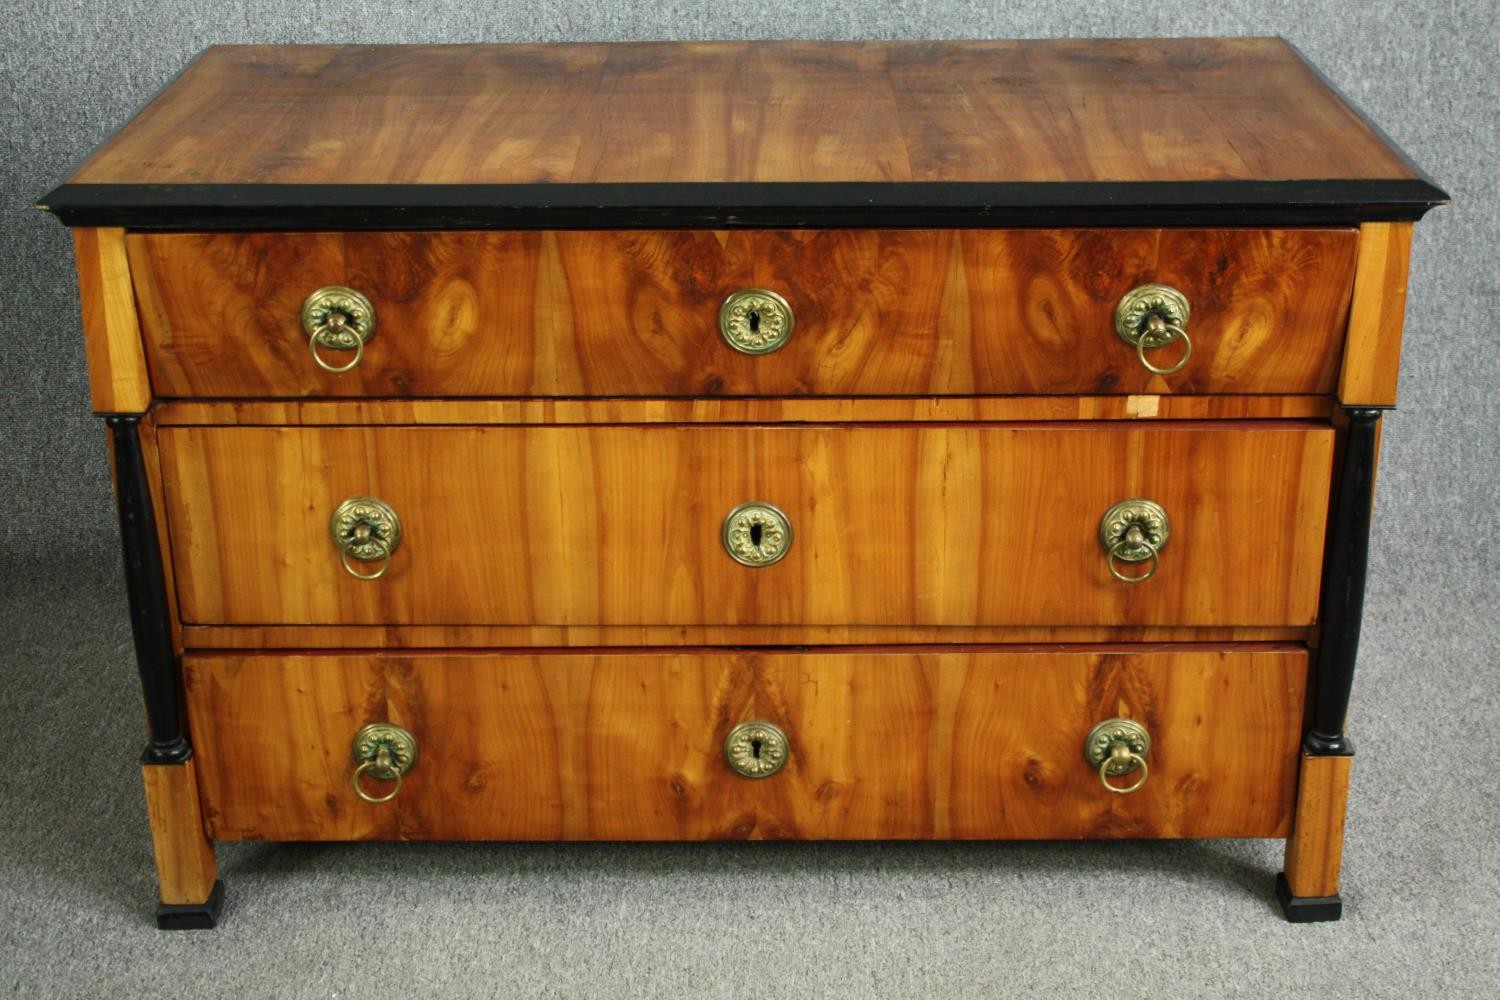 An early 19th century walnut Biedermeier chest of three long drawers flanked by ebonised pilasters